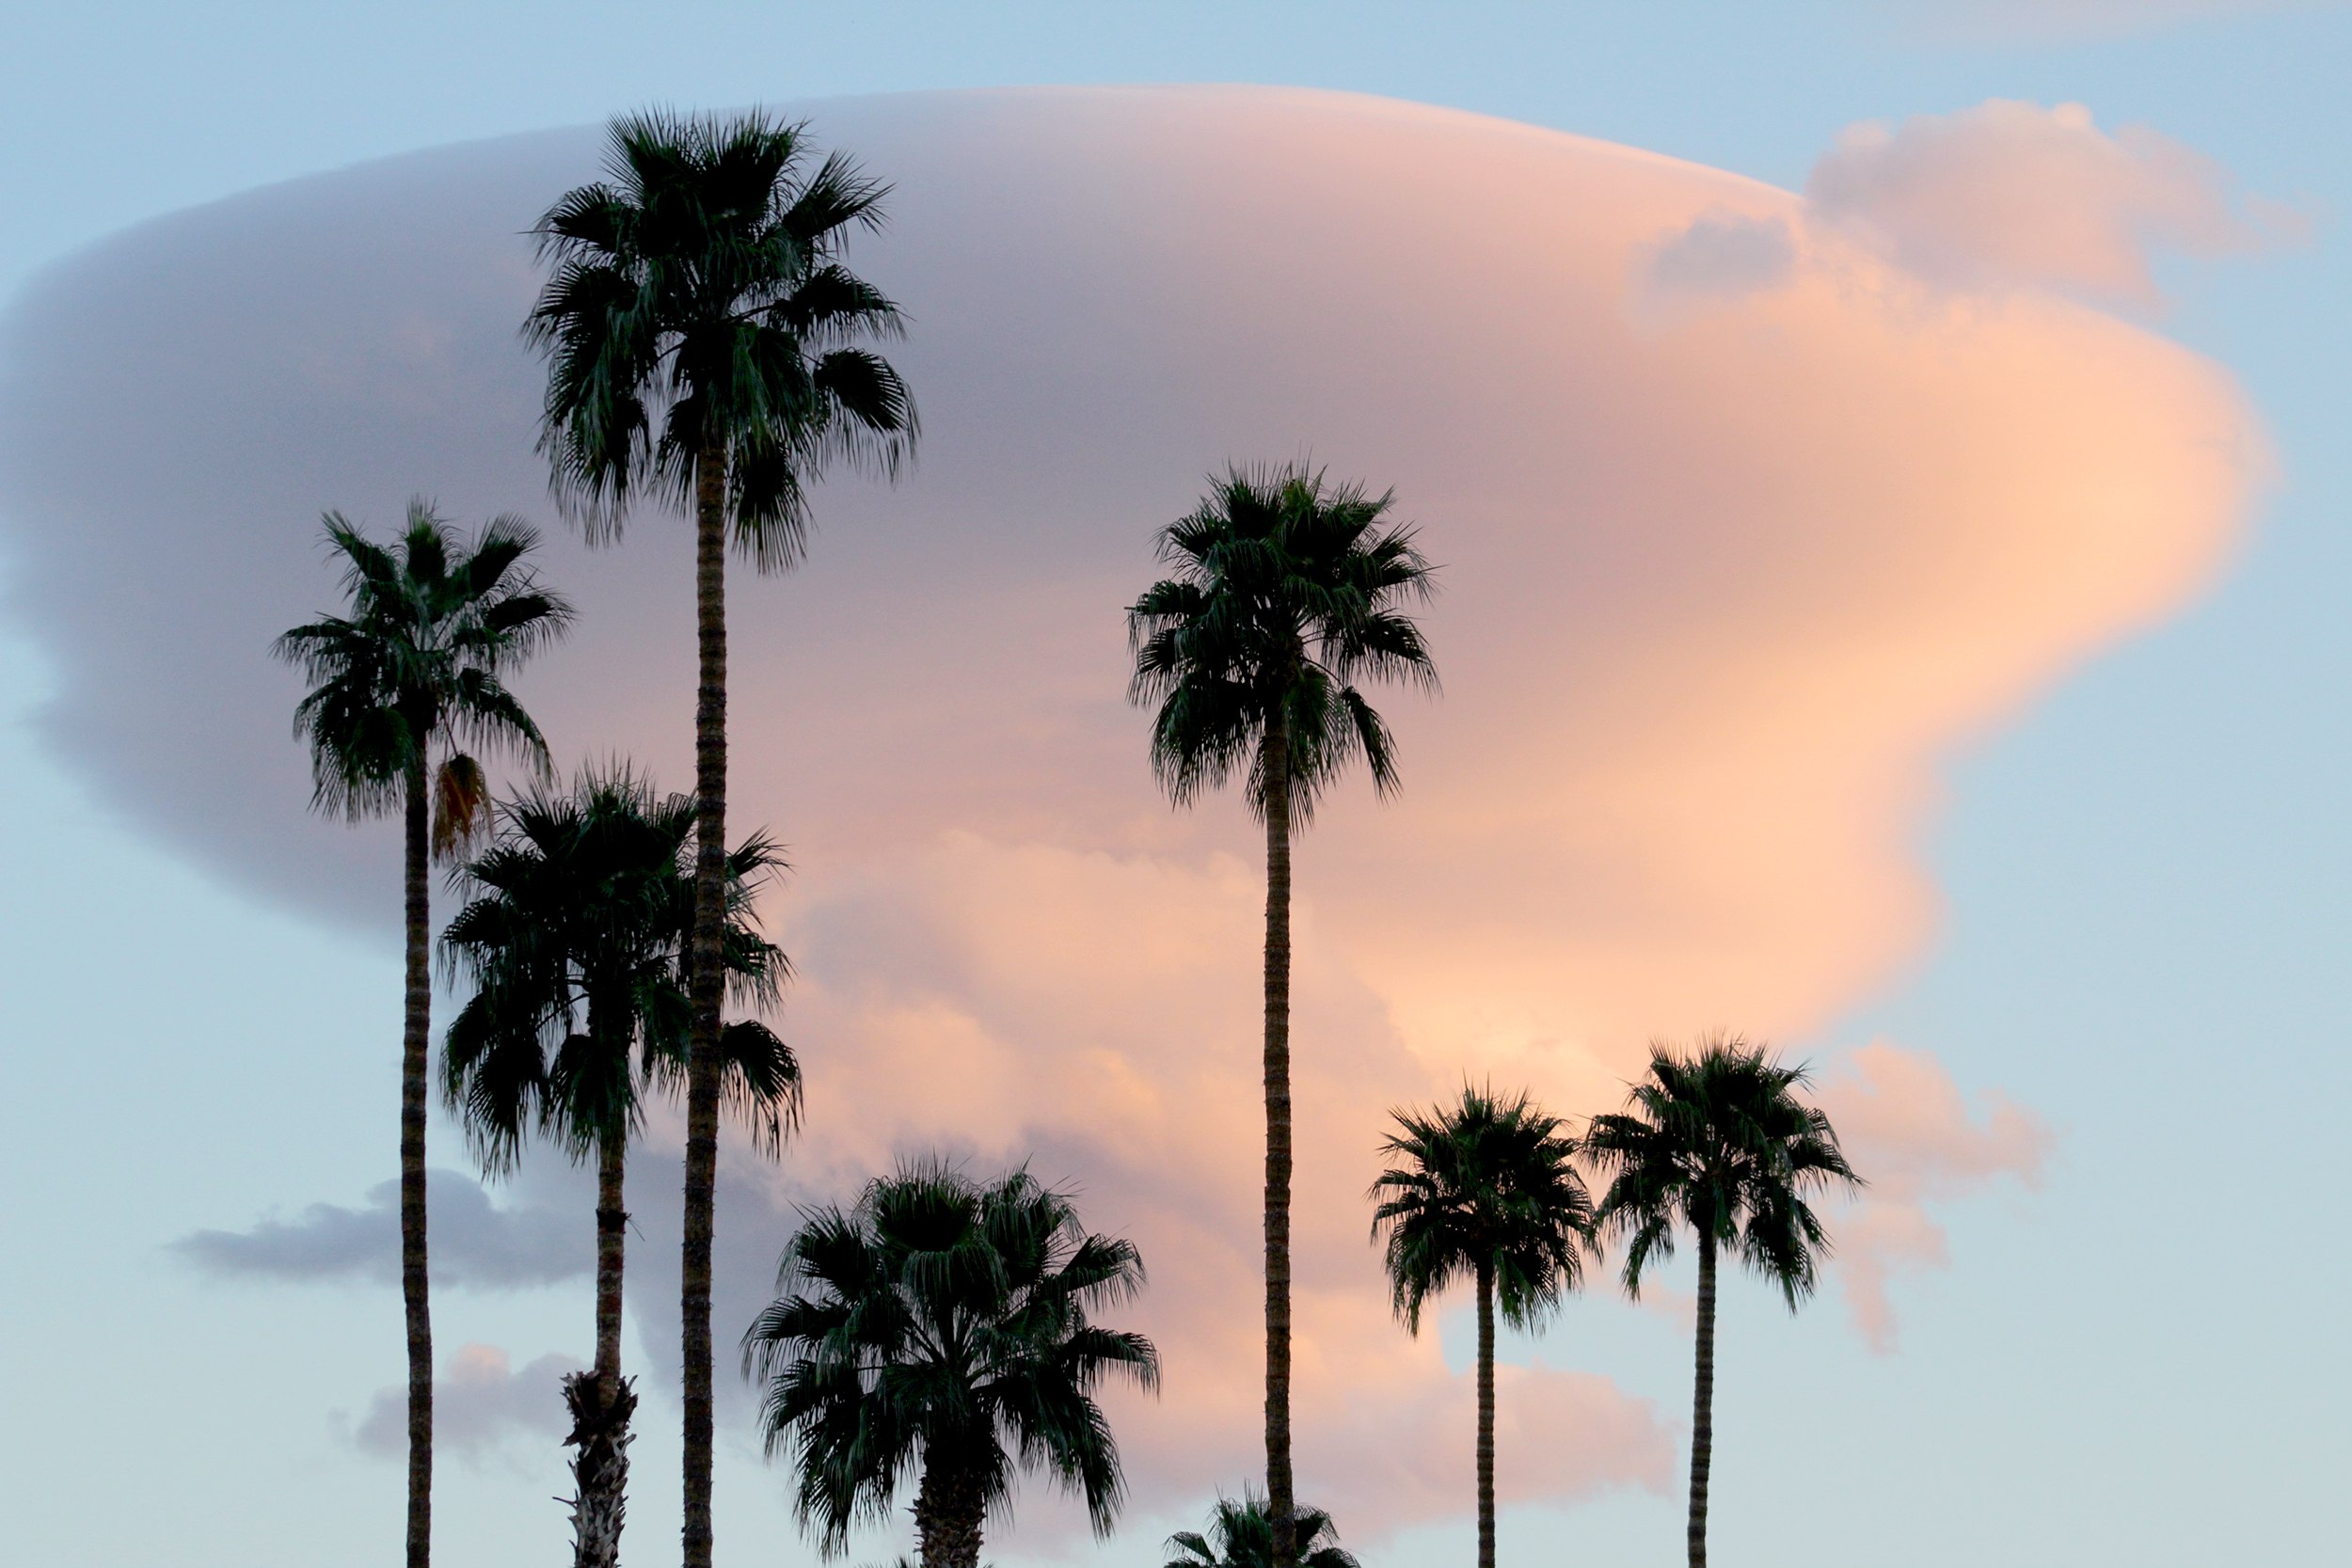 Palms and Thundercloud, Palm Springs, California 